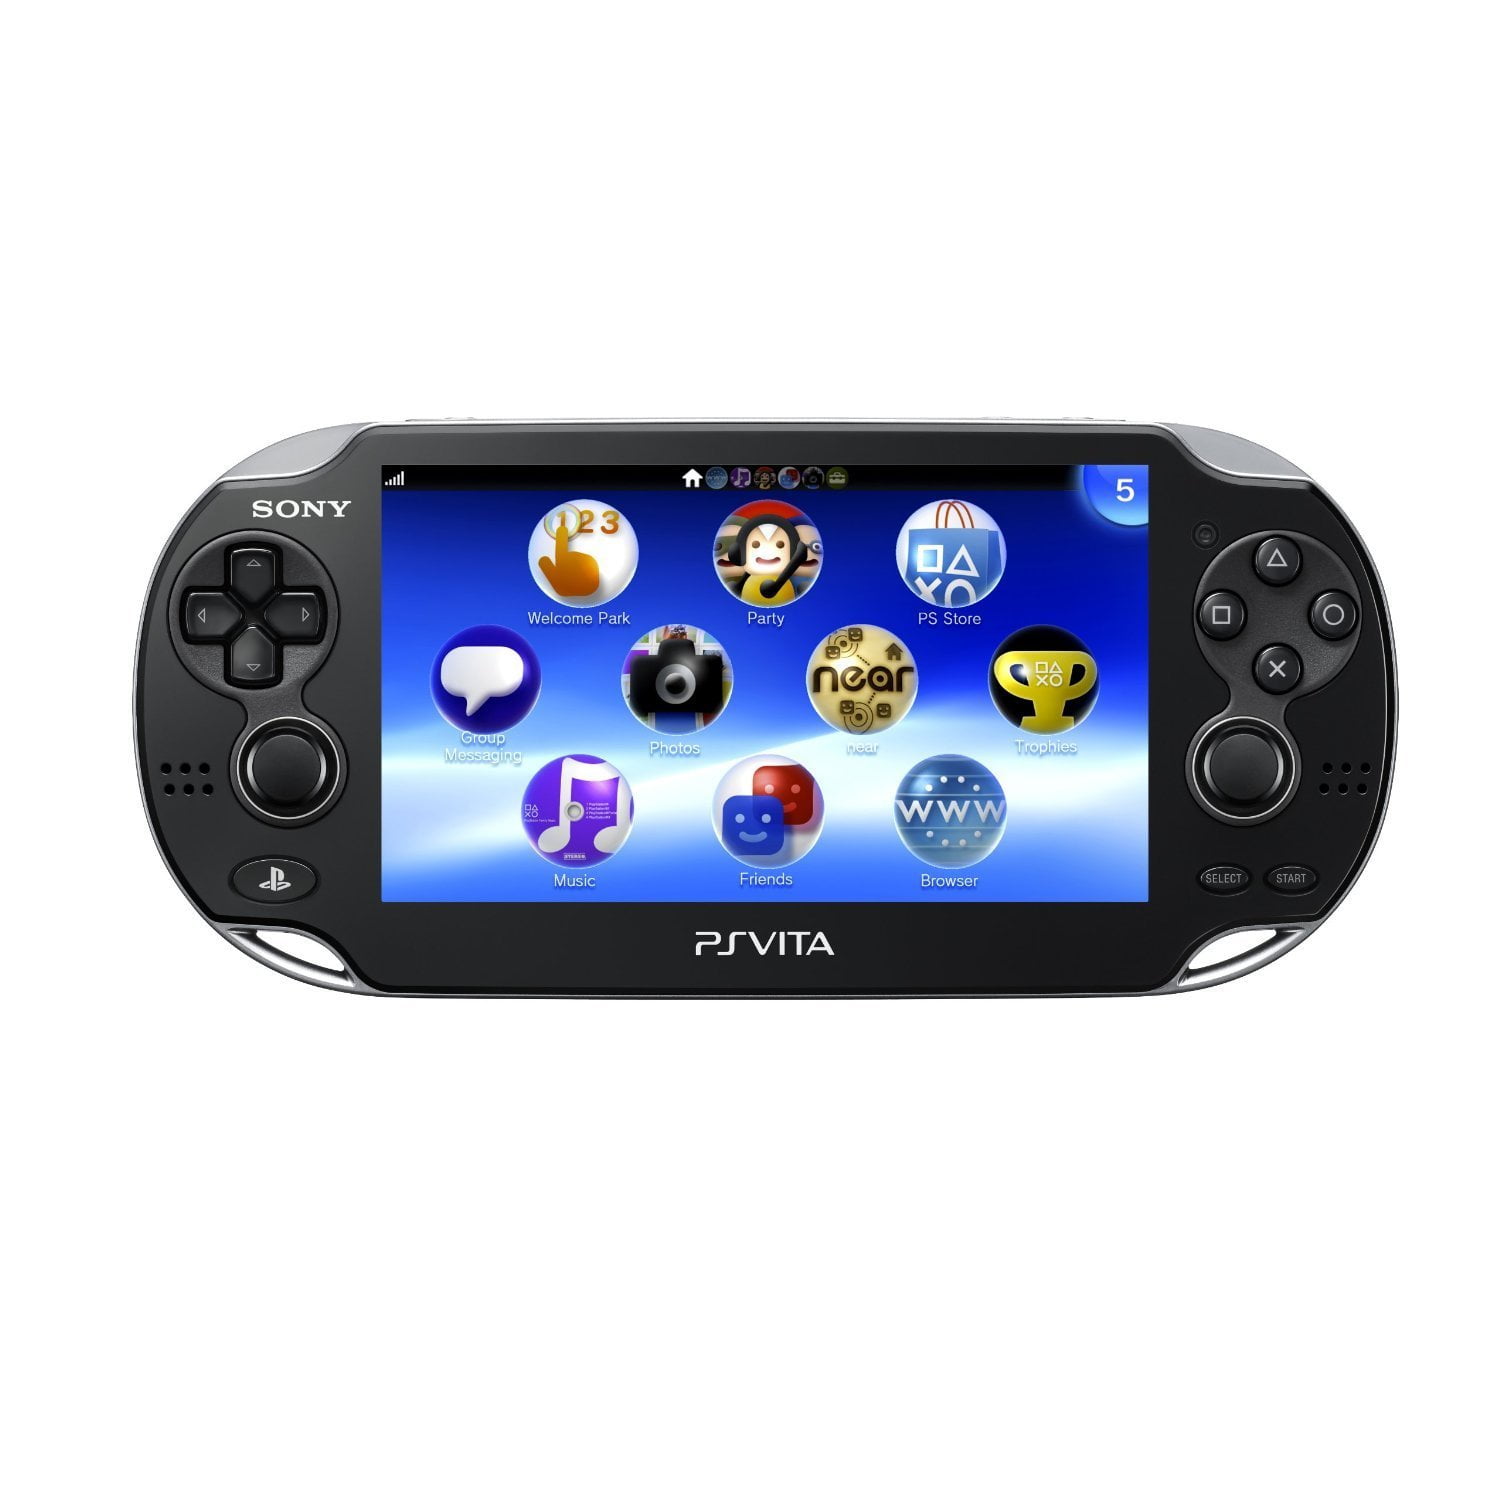 Sony PCH-1101 Playstation Vita with WiFi/3G (Certified Used)